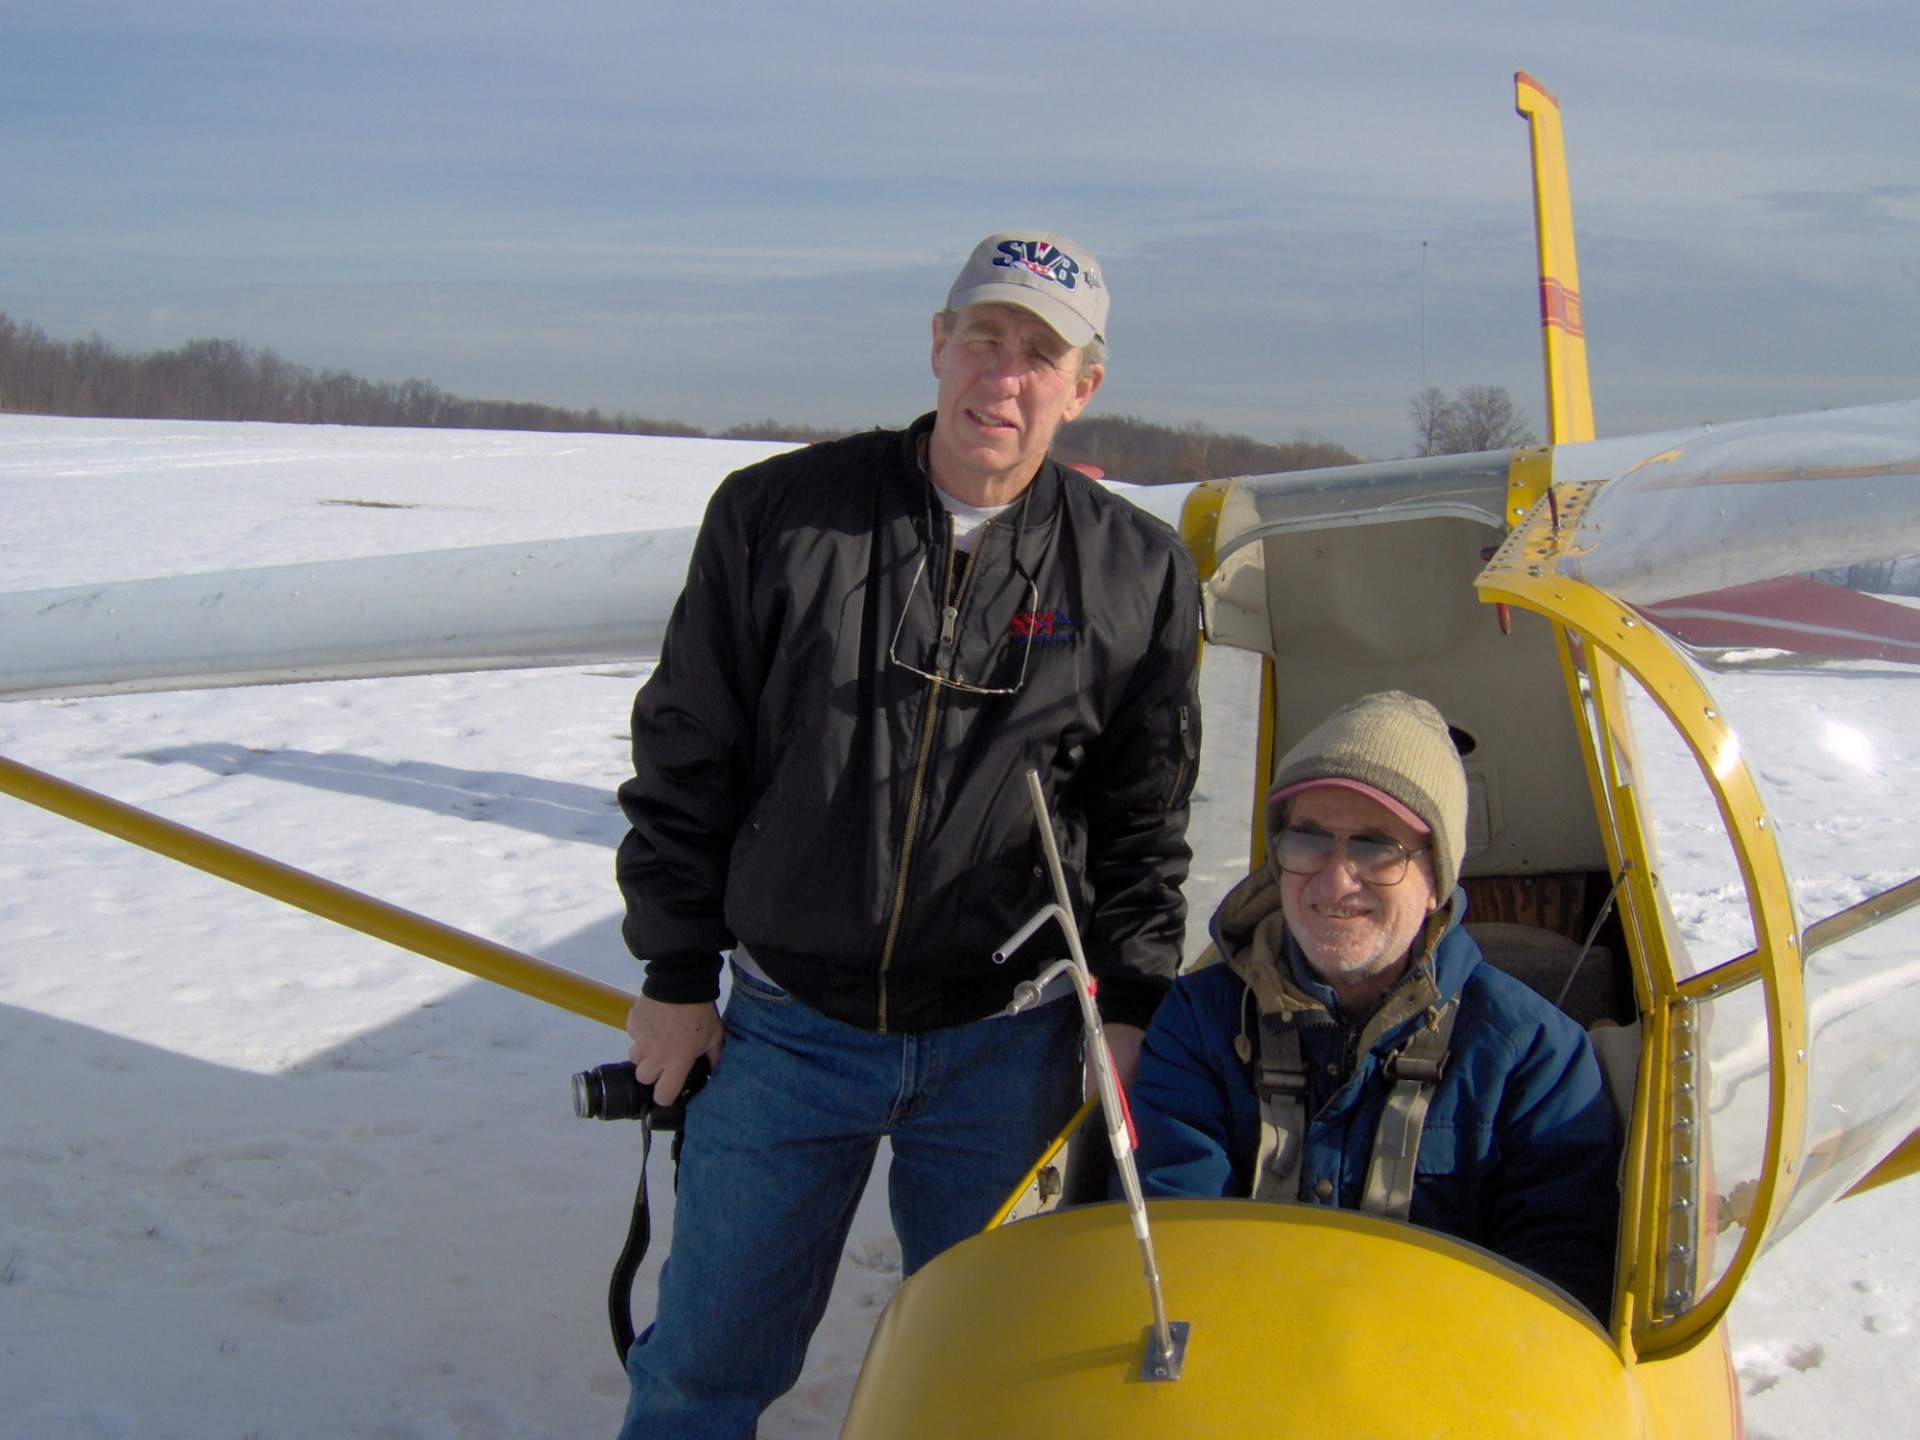 Stephen H. Unger sits in his plane on snowy ground, posing with another individual